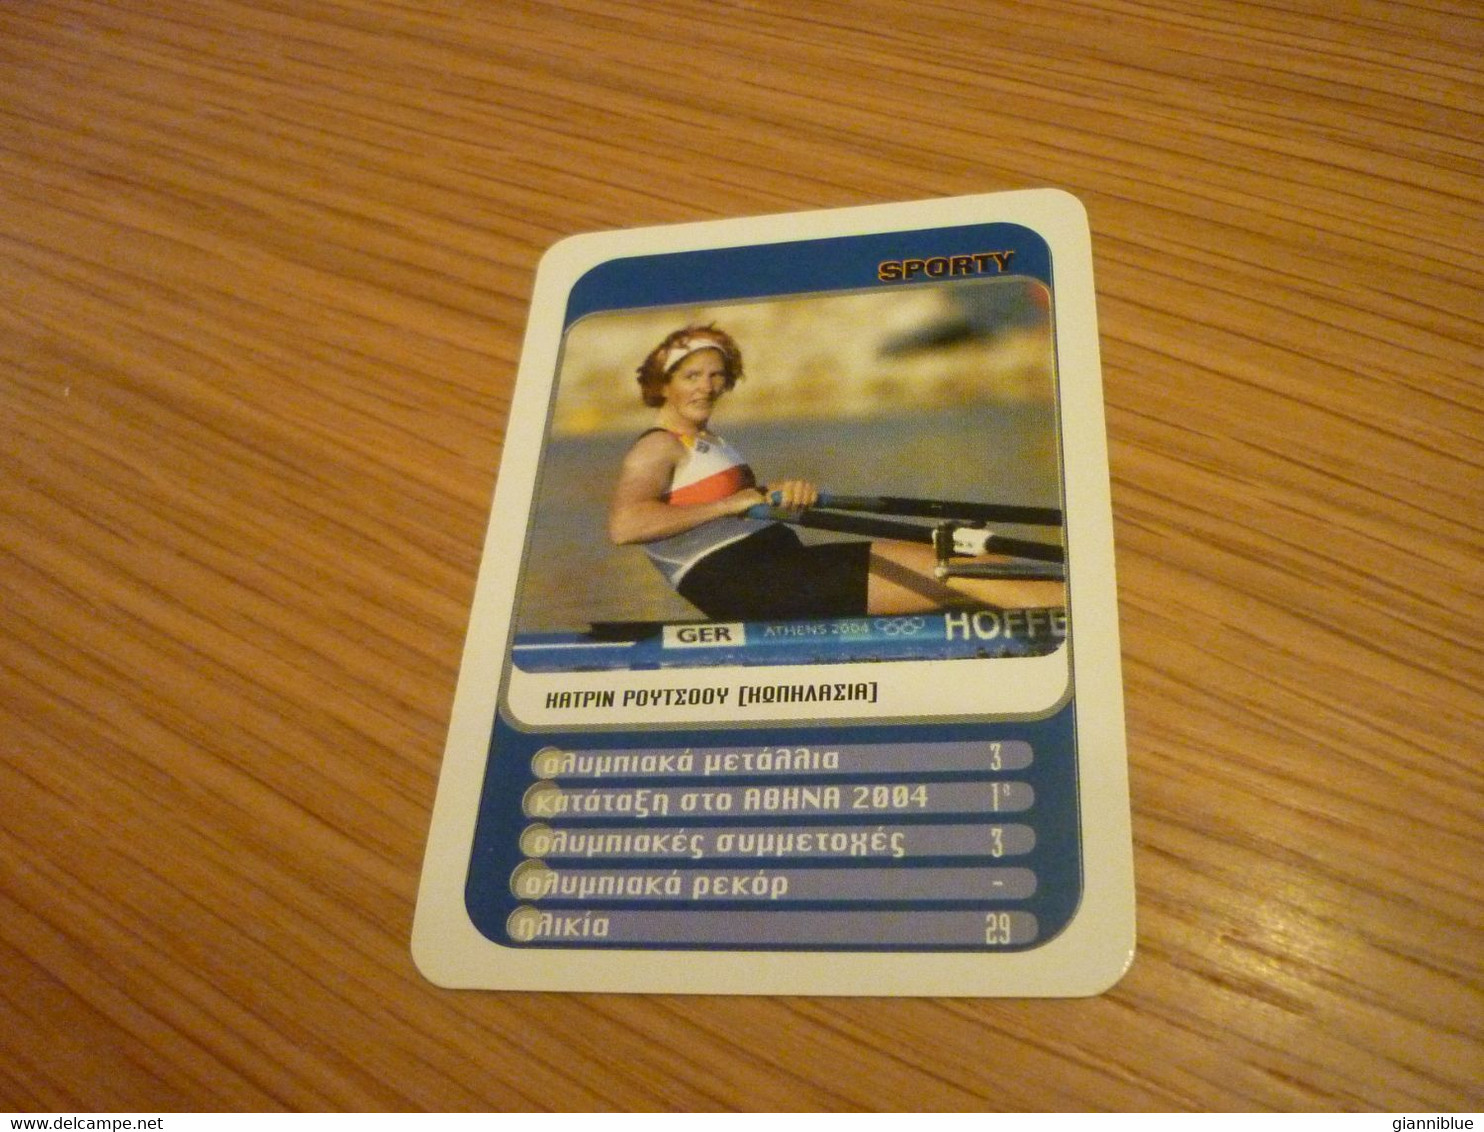 Katrin Rutschow German Rower Rowing Aviron Athens 2004 Olympic Games Medalist Greece Greek Trading Card - Remo